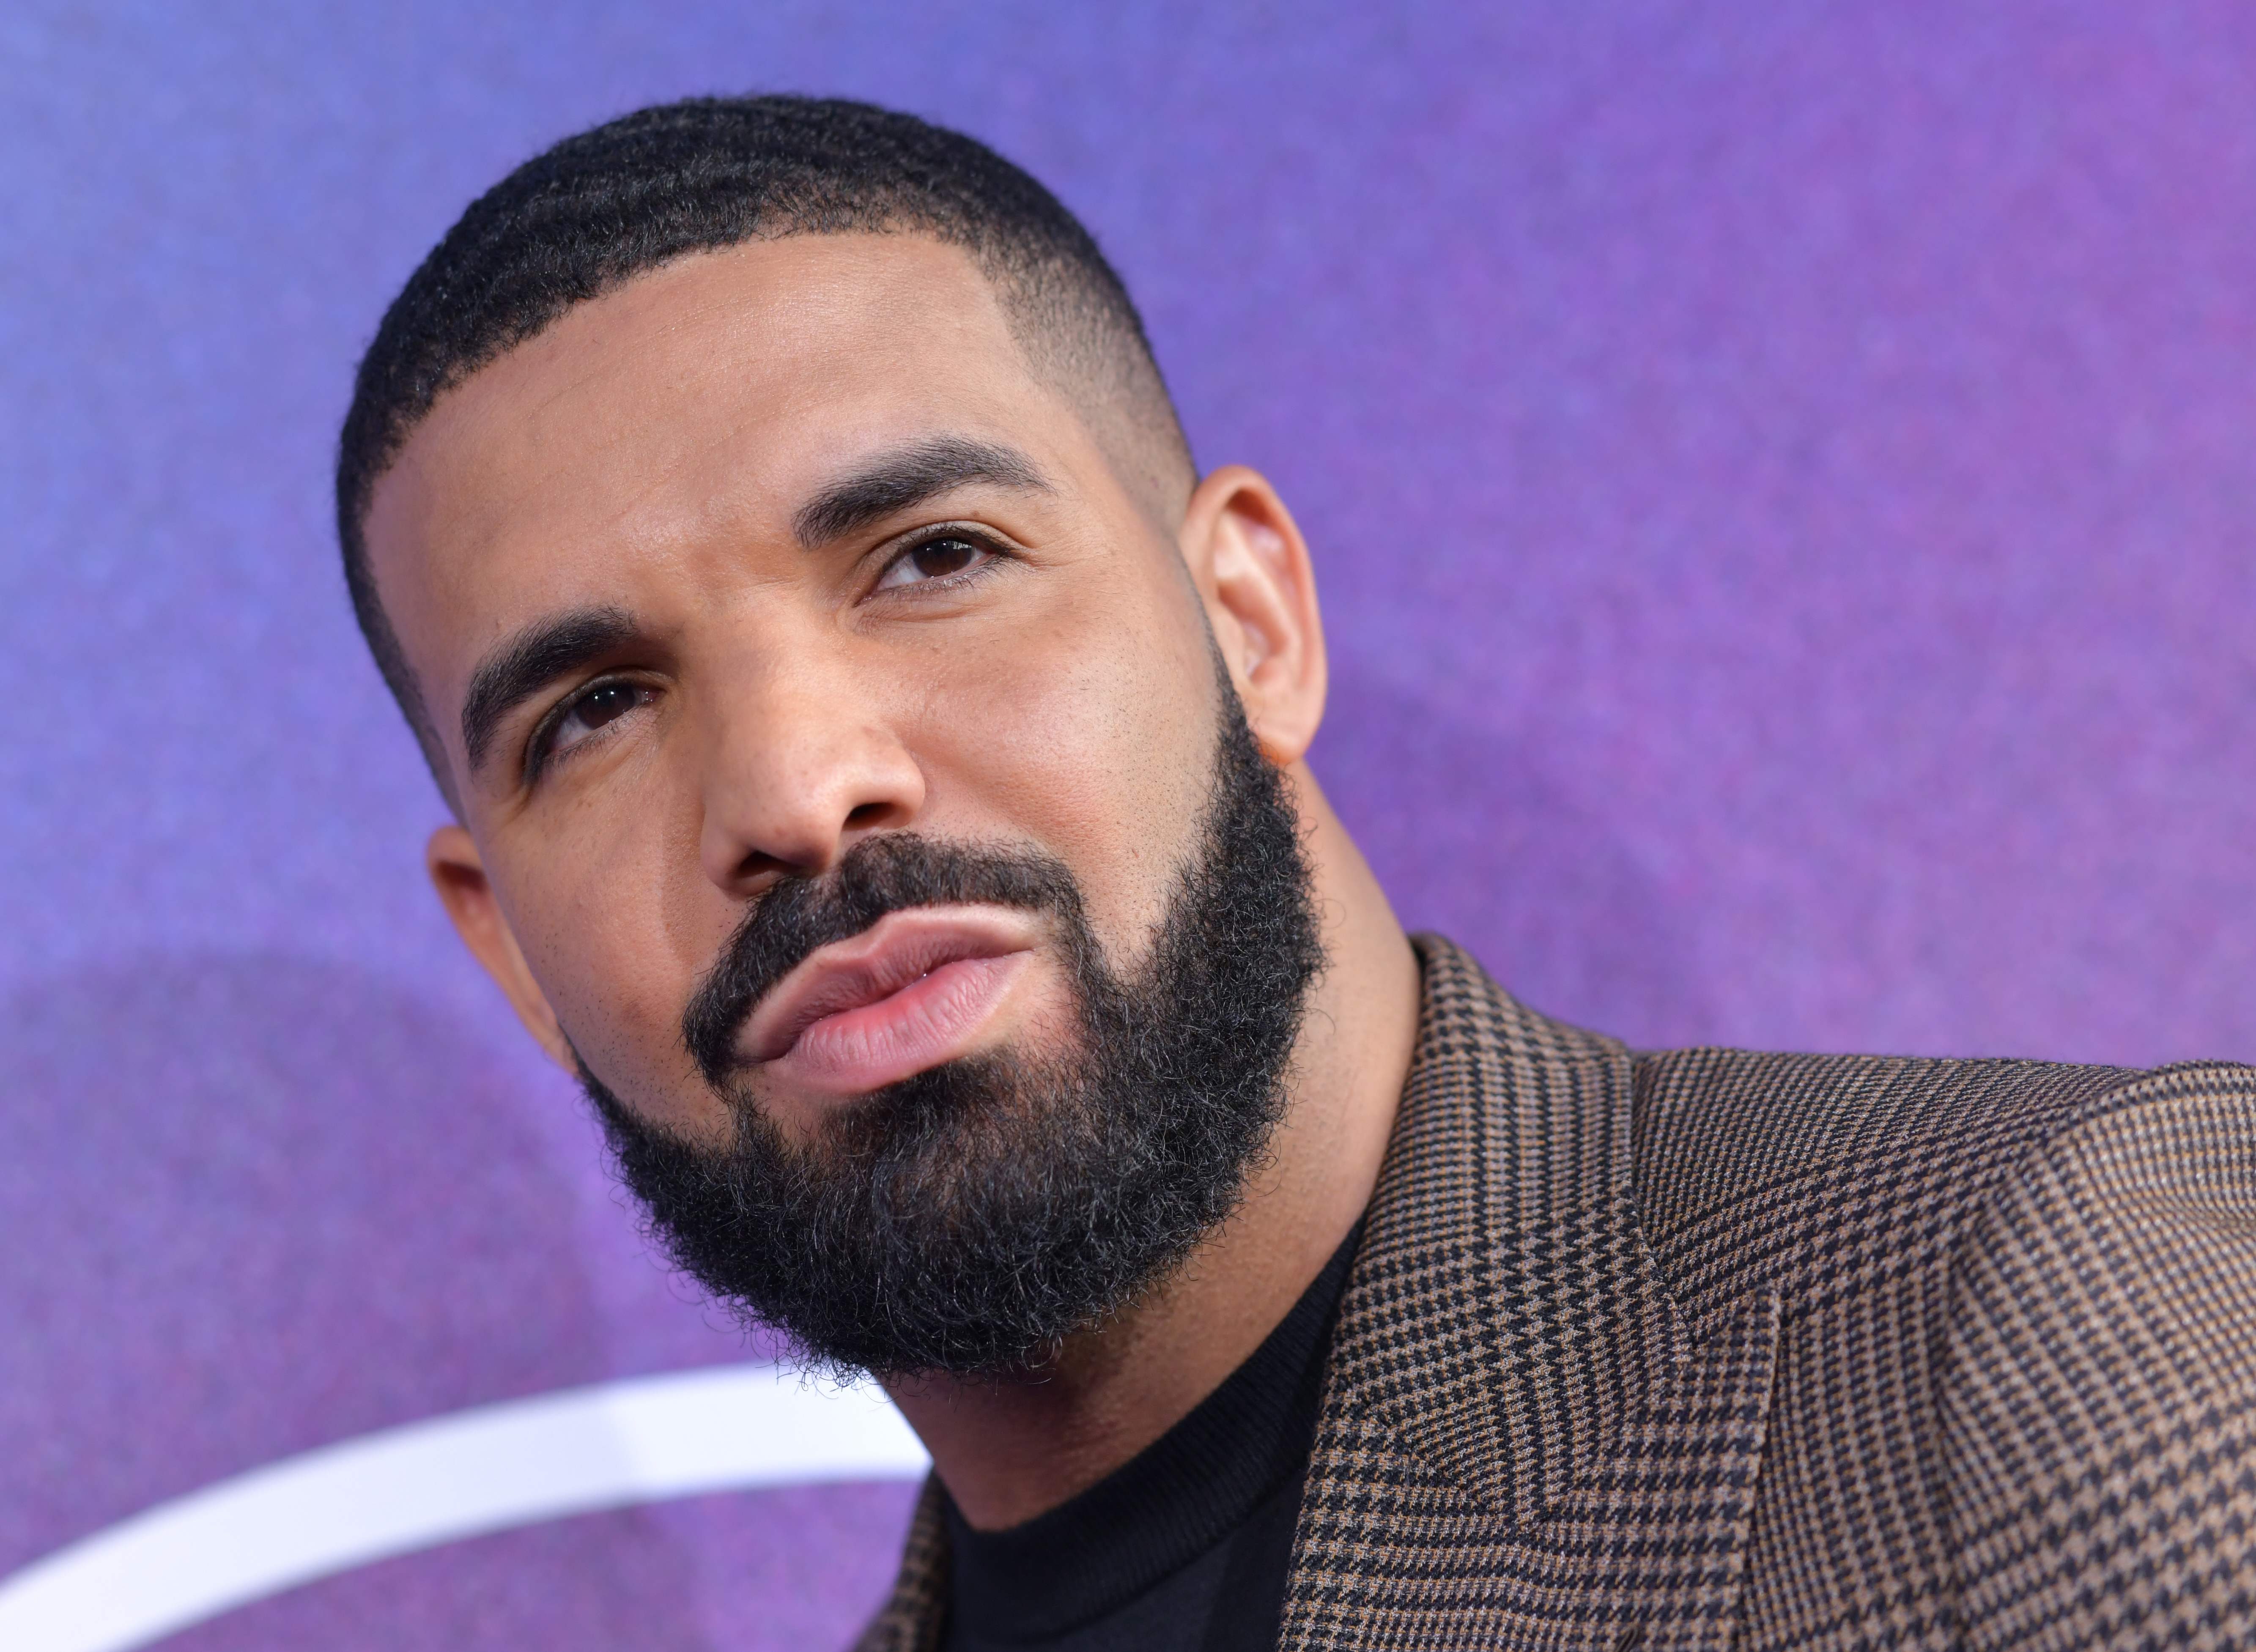 Drake attends the Los Angeles premiere of the new HBO series “Euphoria” at the Cinerama Dome Theatre in Hollywood in June.